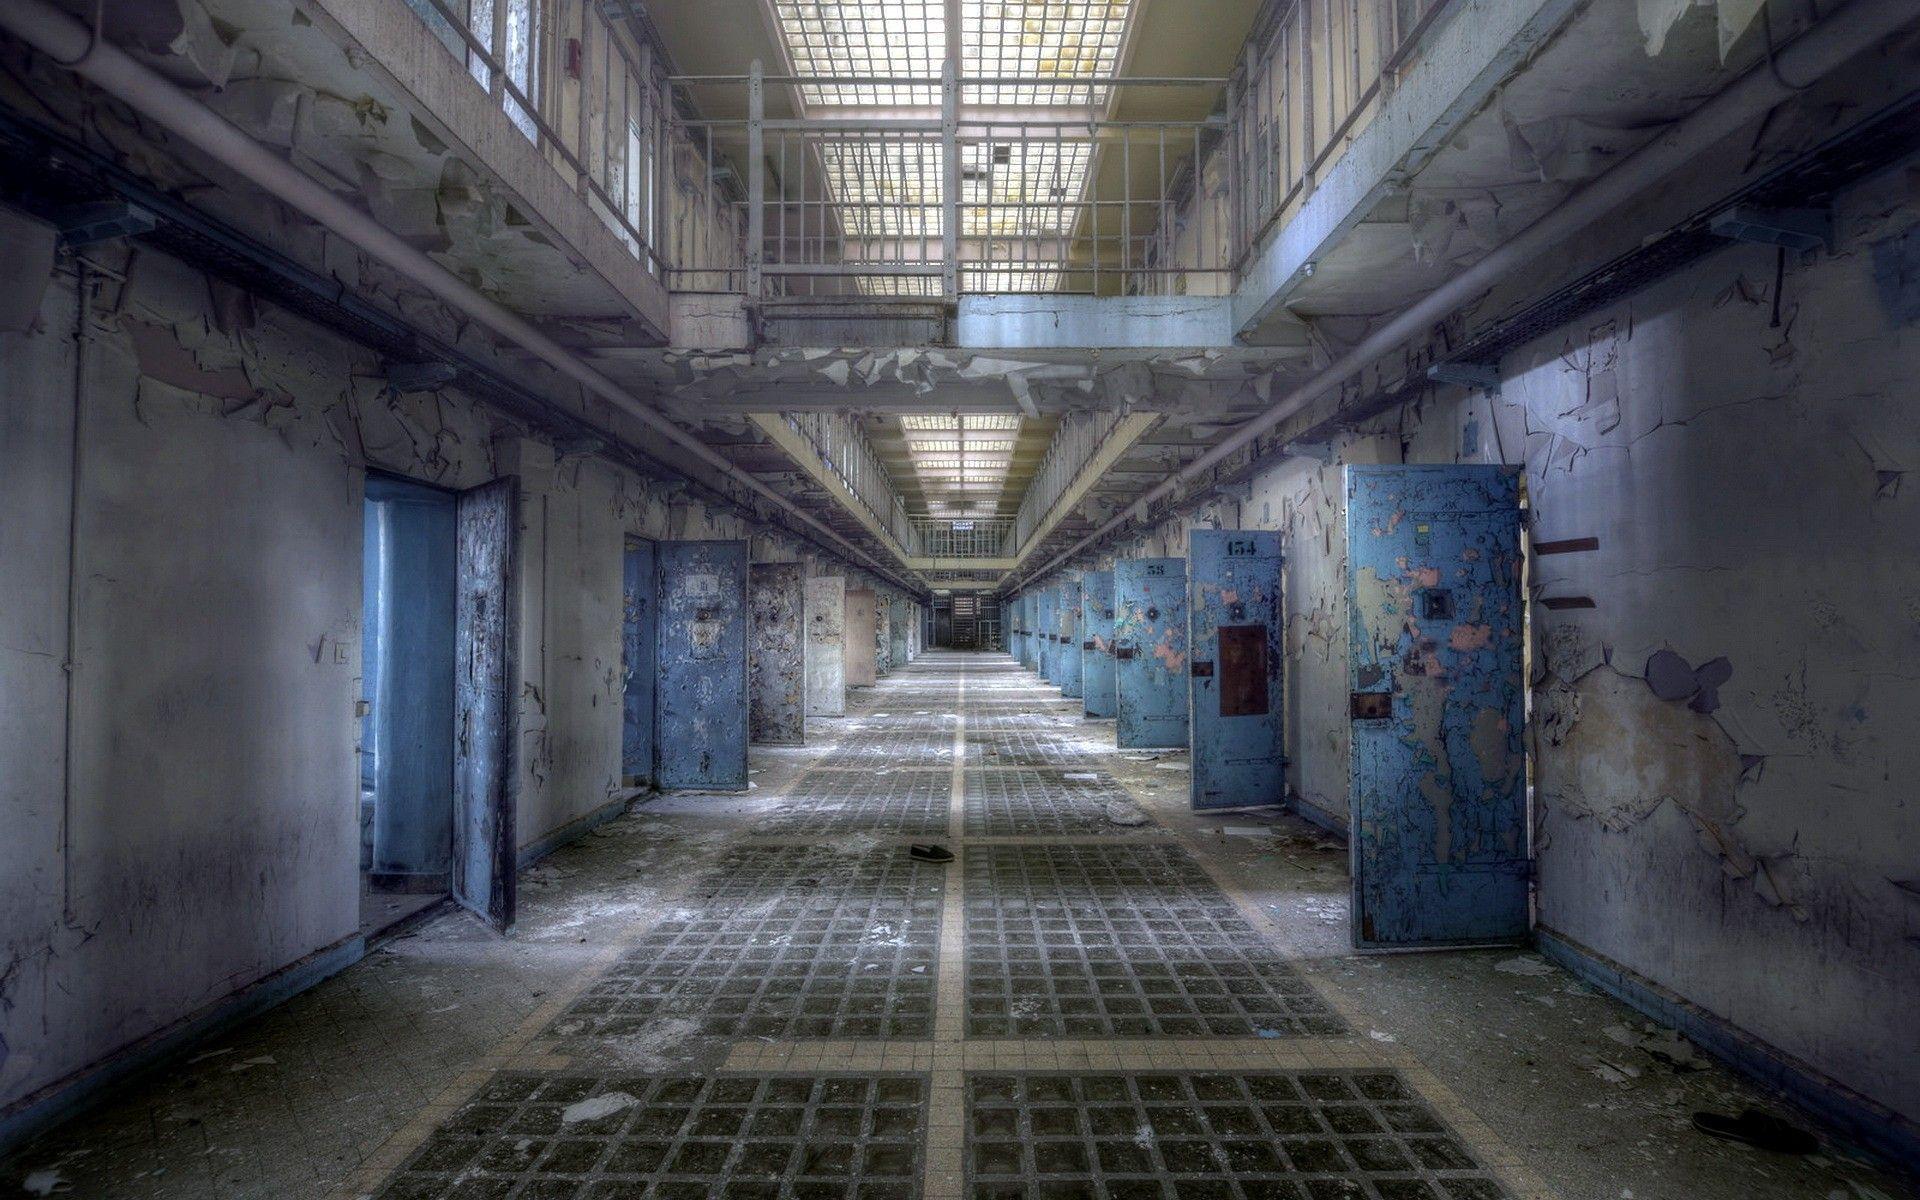 The interior of an abandoned prison wallpaper and image